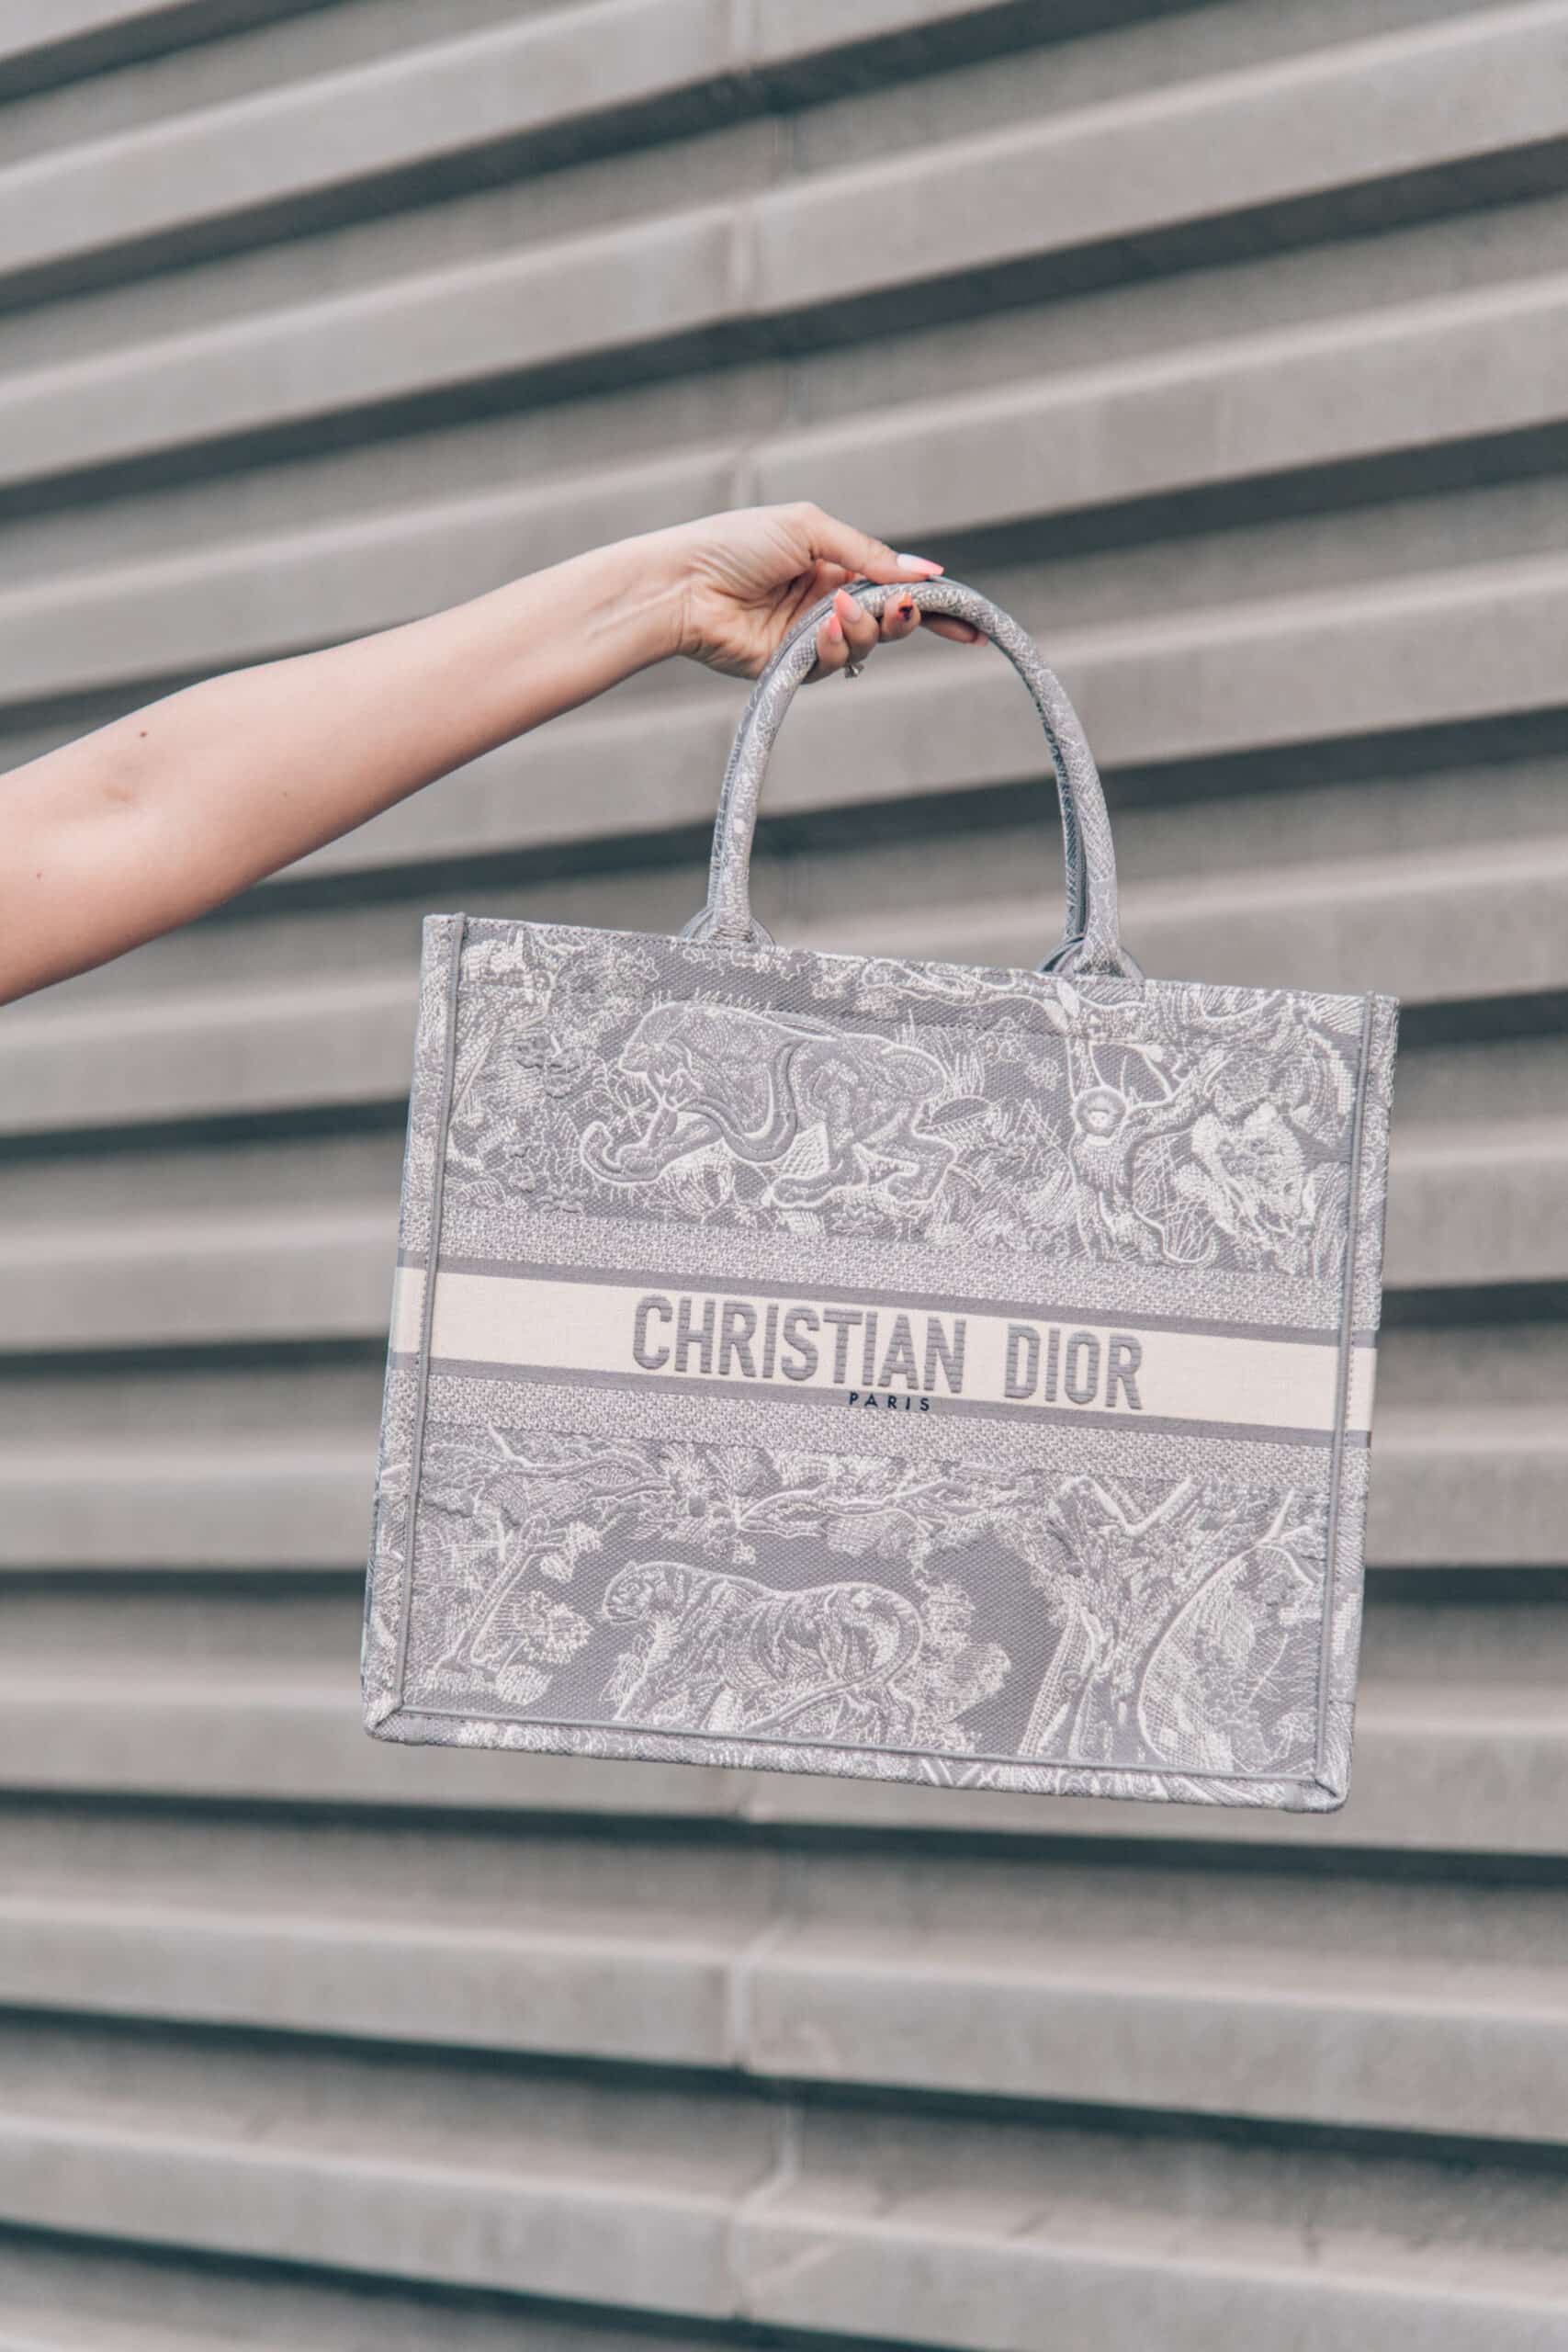 Best Dior Book Tote Bag Dupes Alternatives and Look Alikes